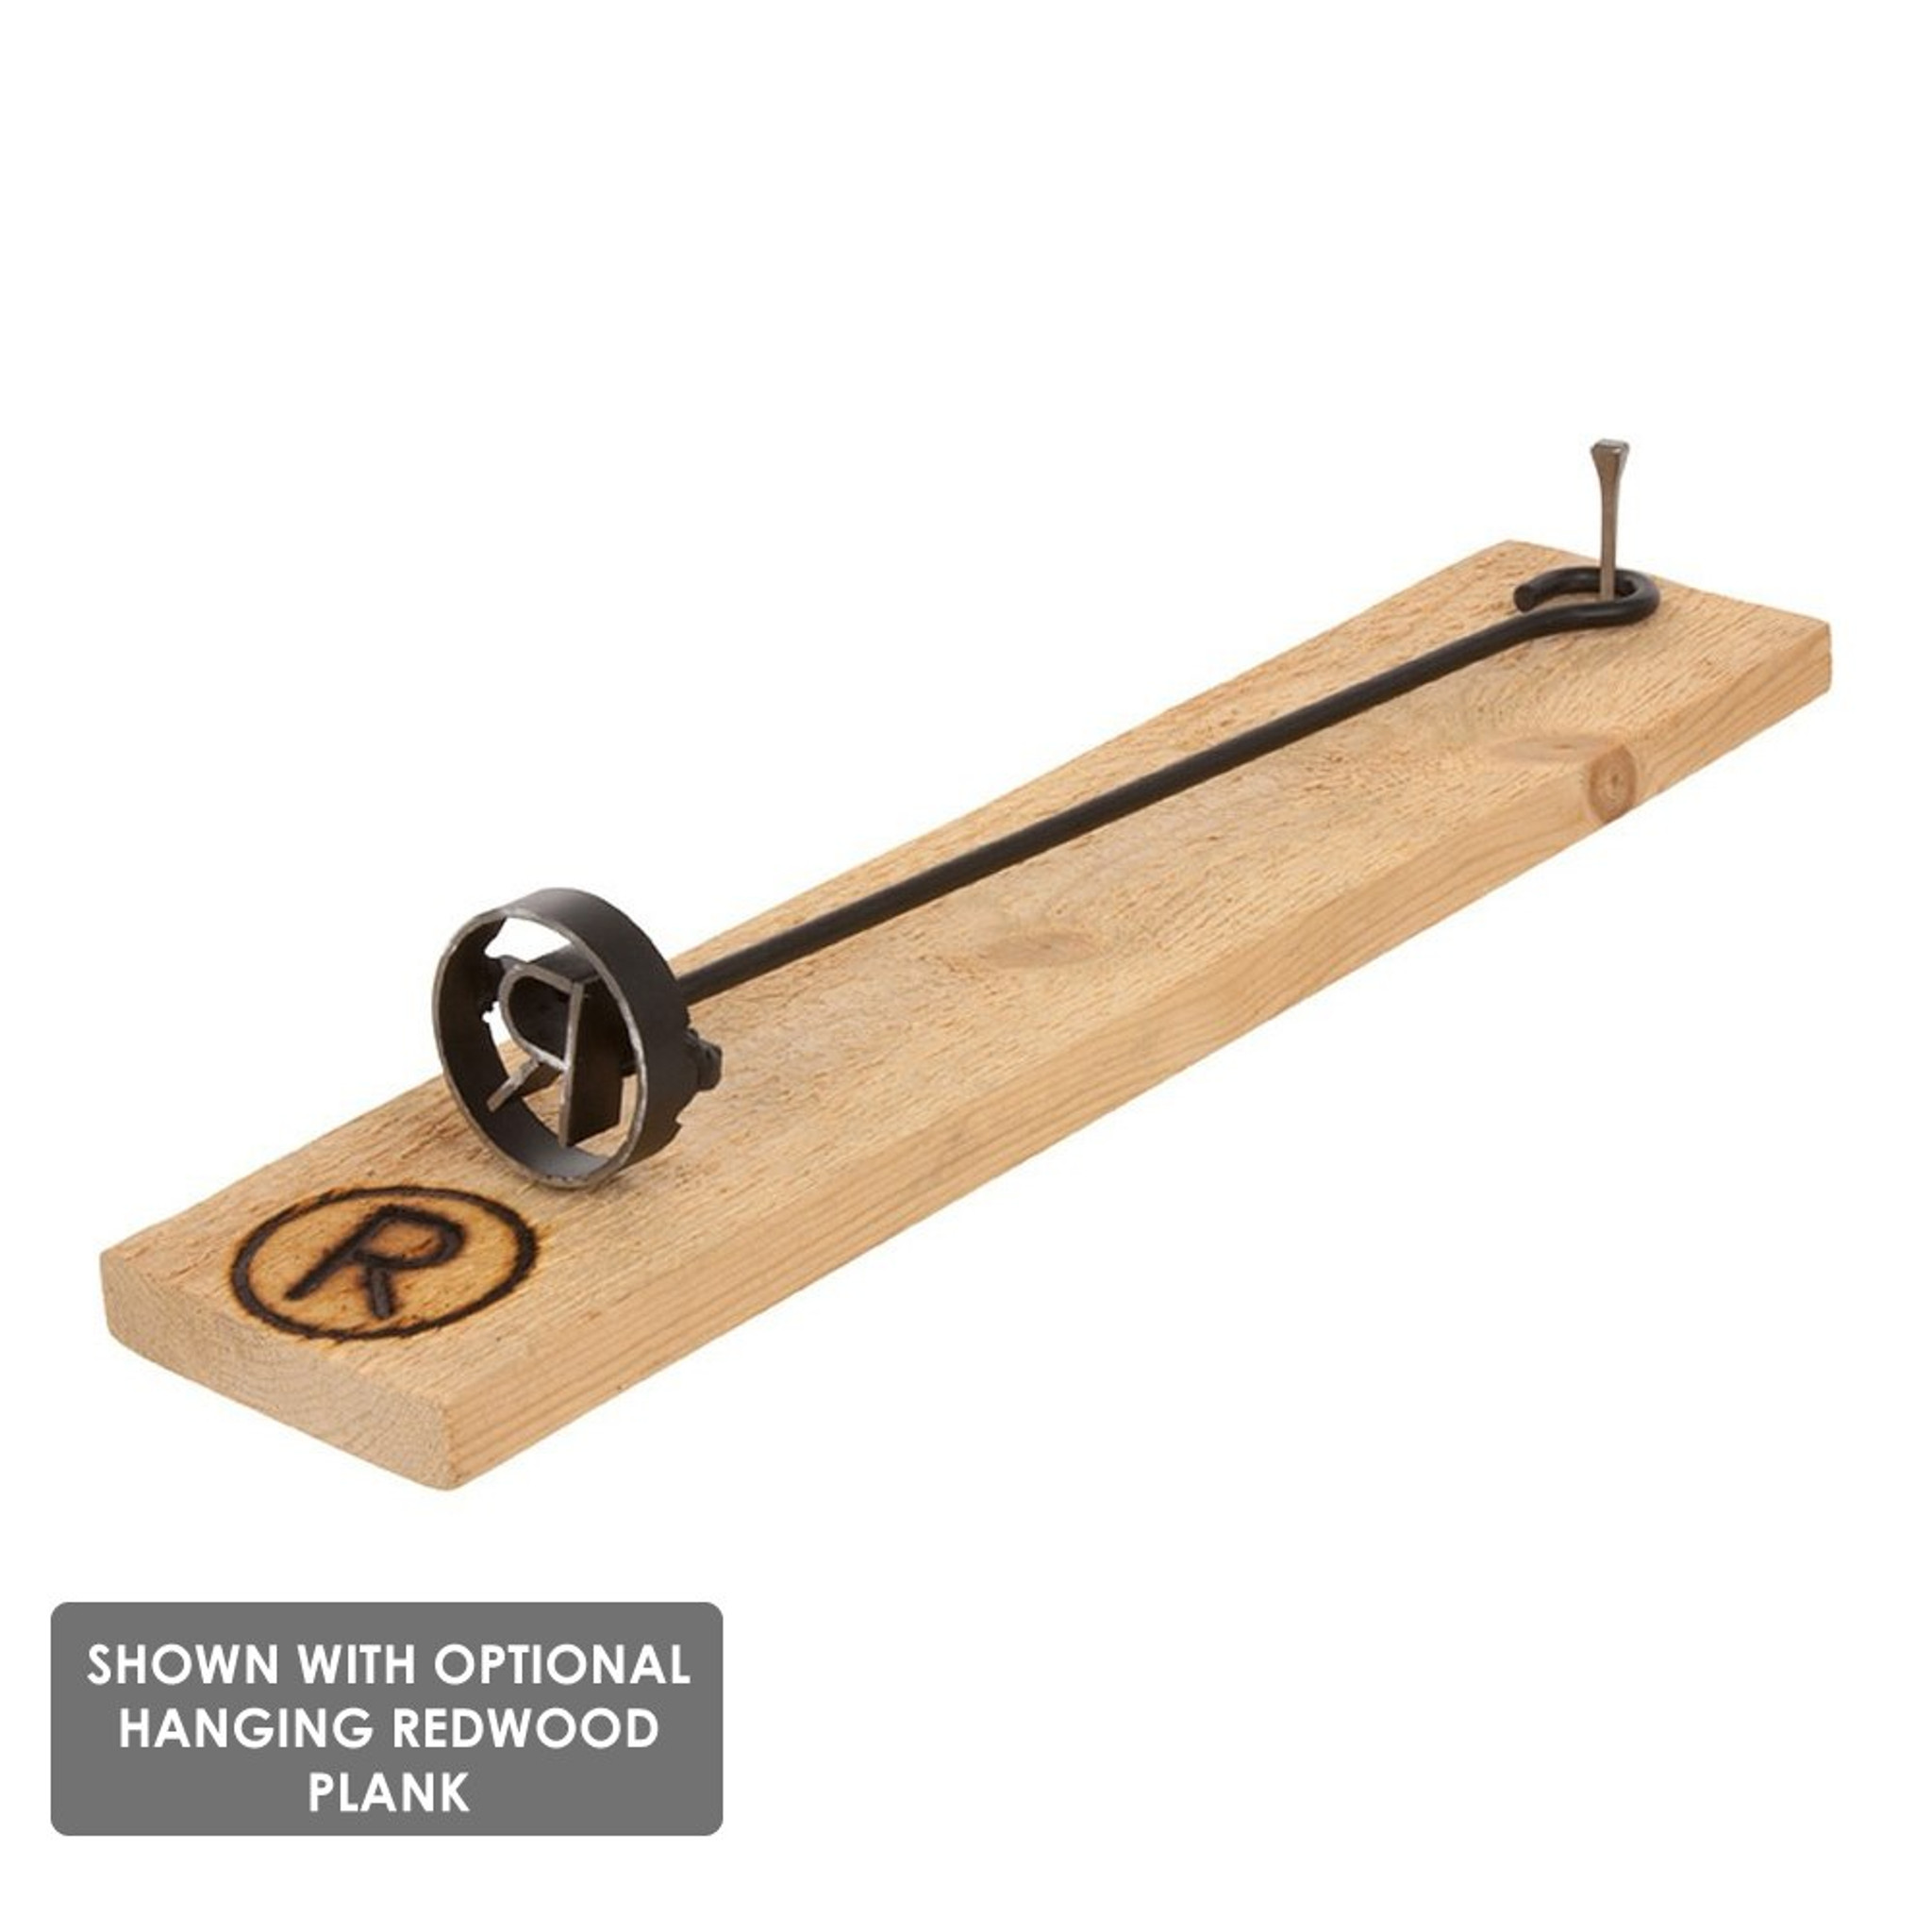 Custom branding iron - Purchase online from our Internet store